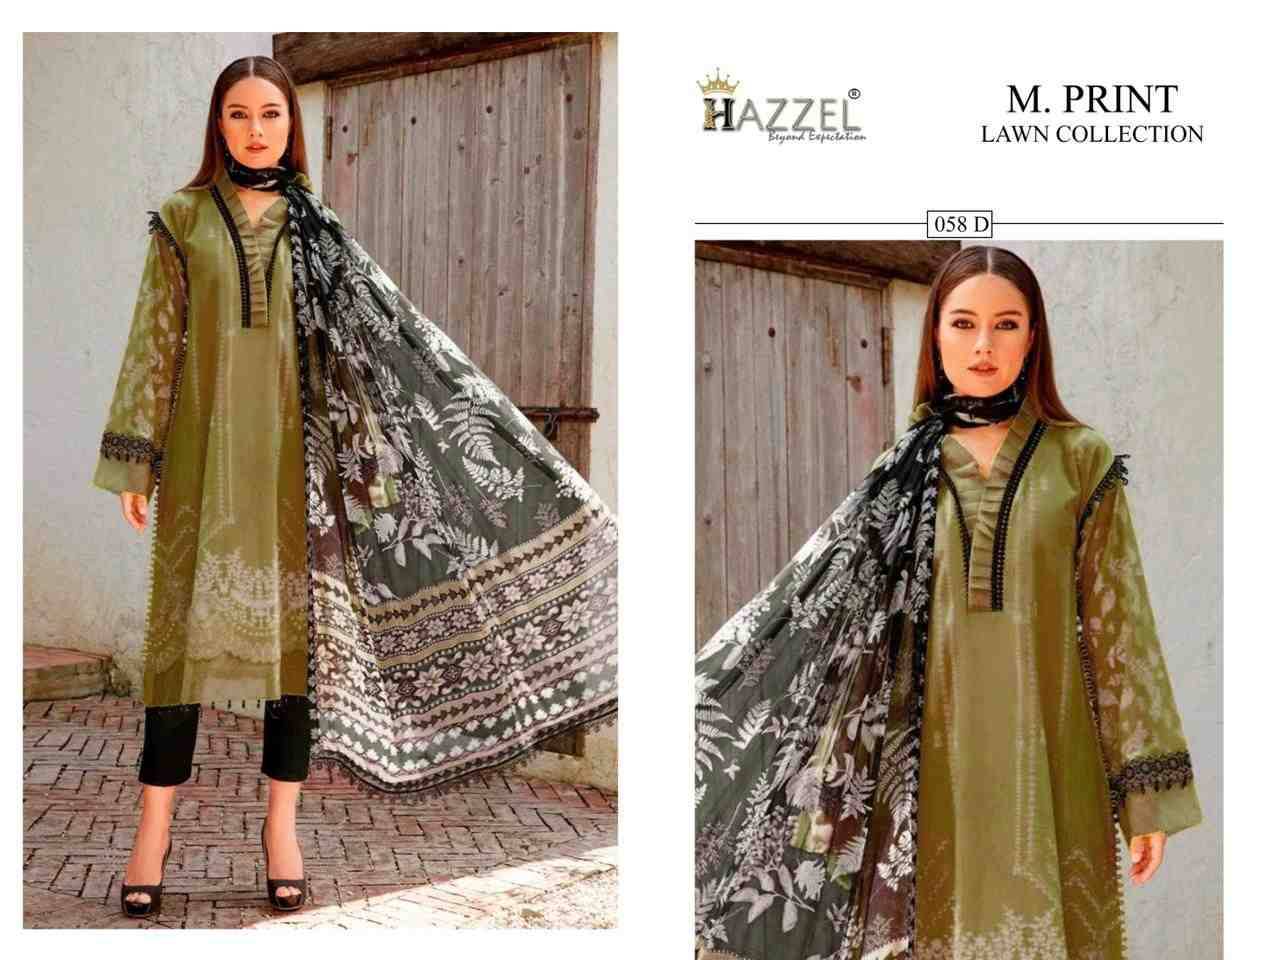 M.Print Lawn Collection By Hazzel 058-A To 058-D Series Beautiful Pakistani Suits Colorful Stylish Fancy Casual Wear & Ethnic Wear Pure Cotton Print Embroidered Dresses At Wholesale Price